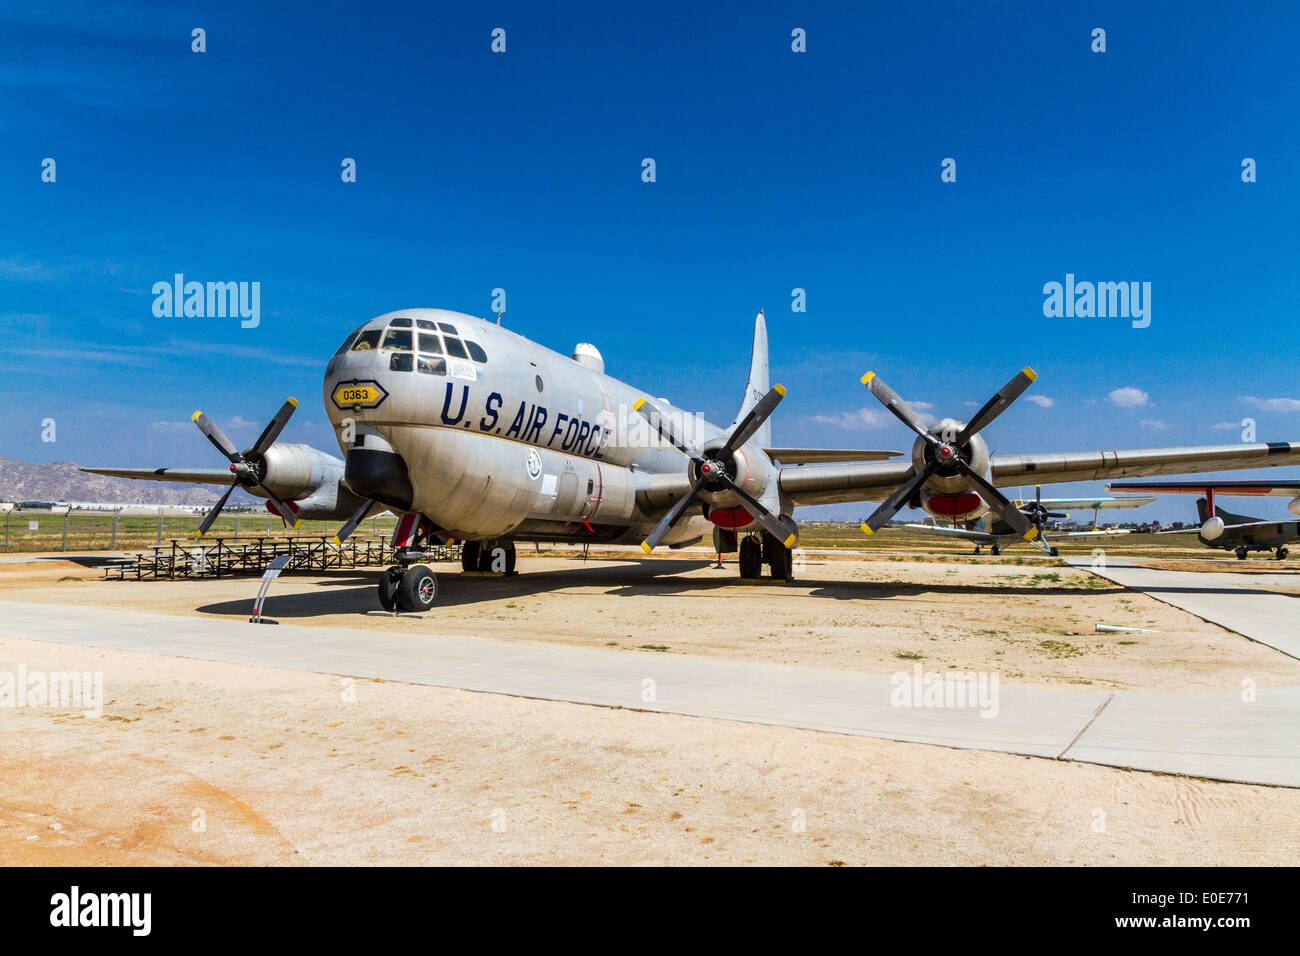 Boeing KC-97 StratoFreighter at the March Field Air Museum in Riverside California Stock Photo